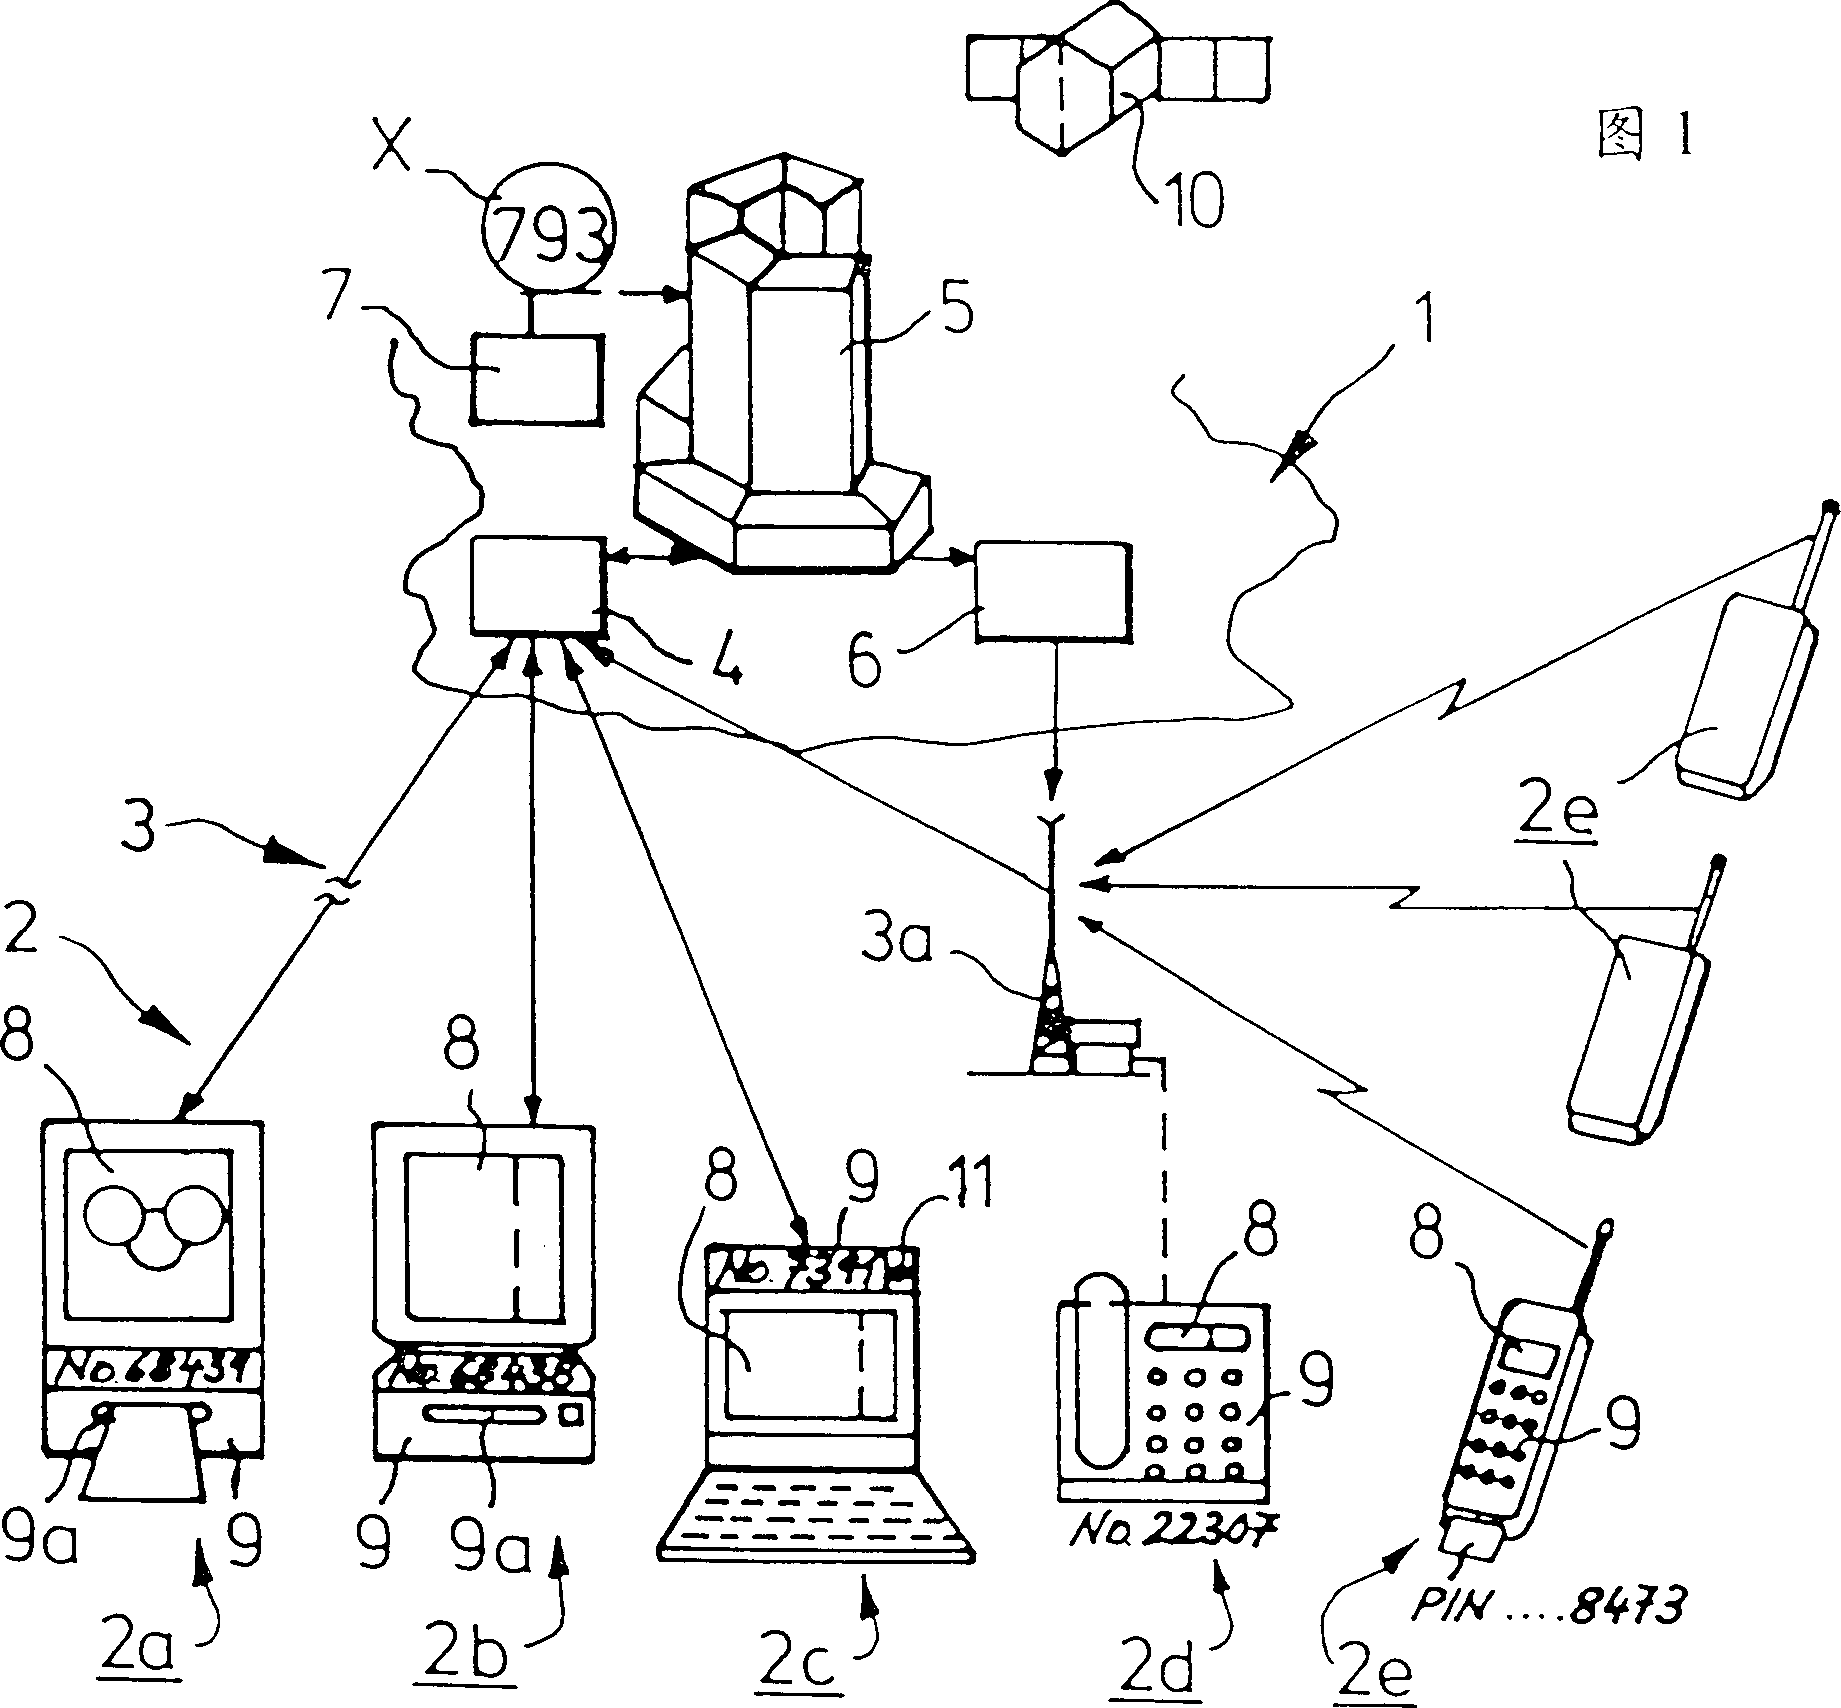 Playing device system